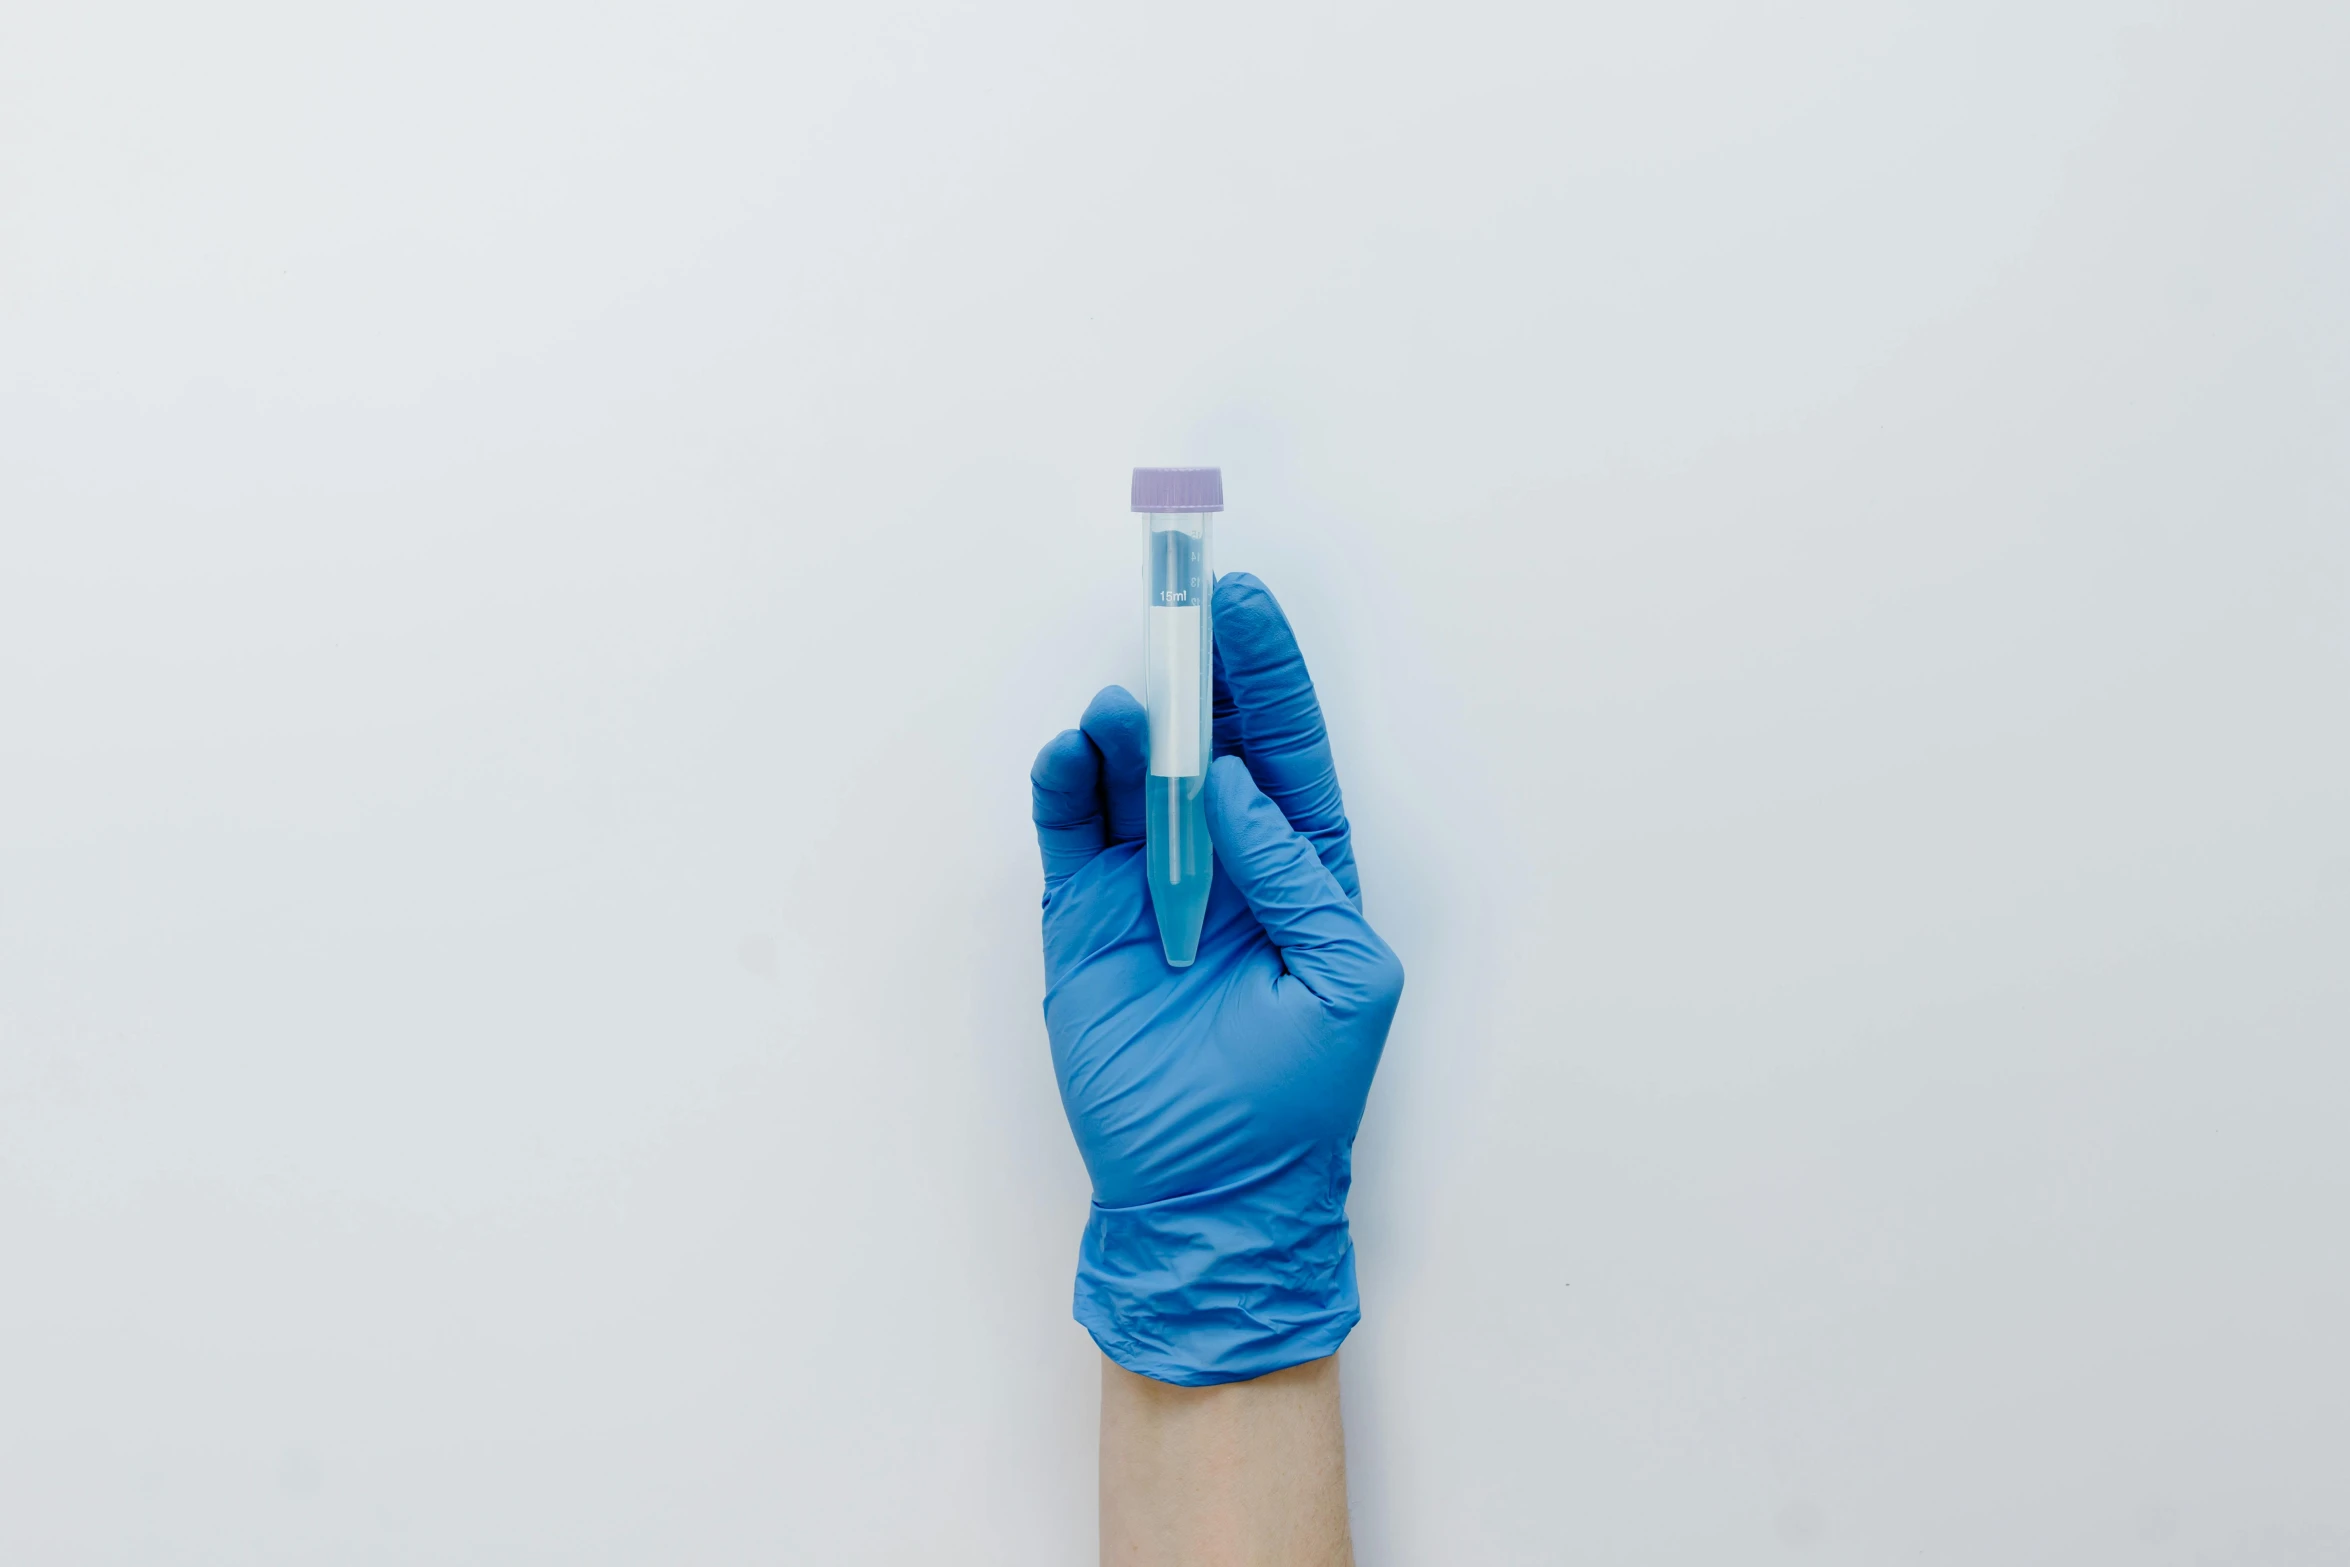 a person's hand in a blue glove holding a piece of paper, iv pole, test tubes, clean aesthetic, thumbnail